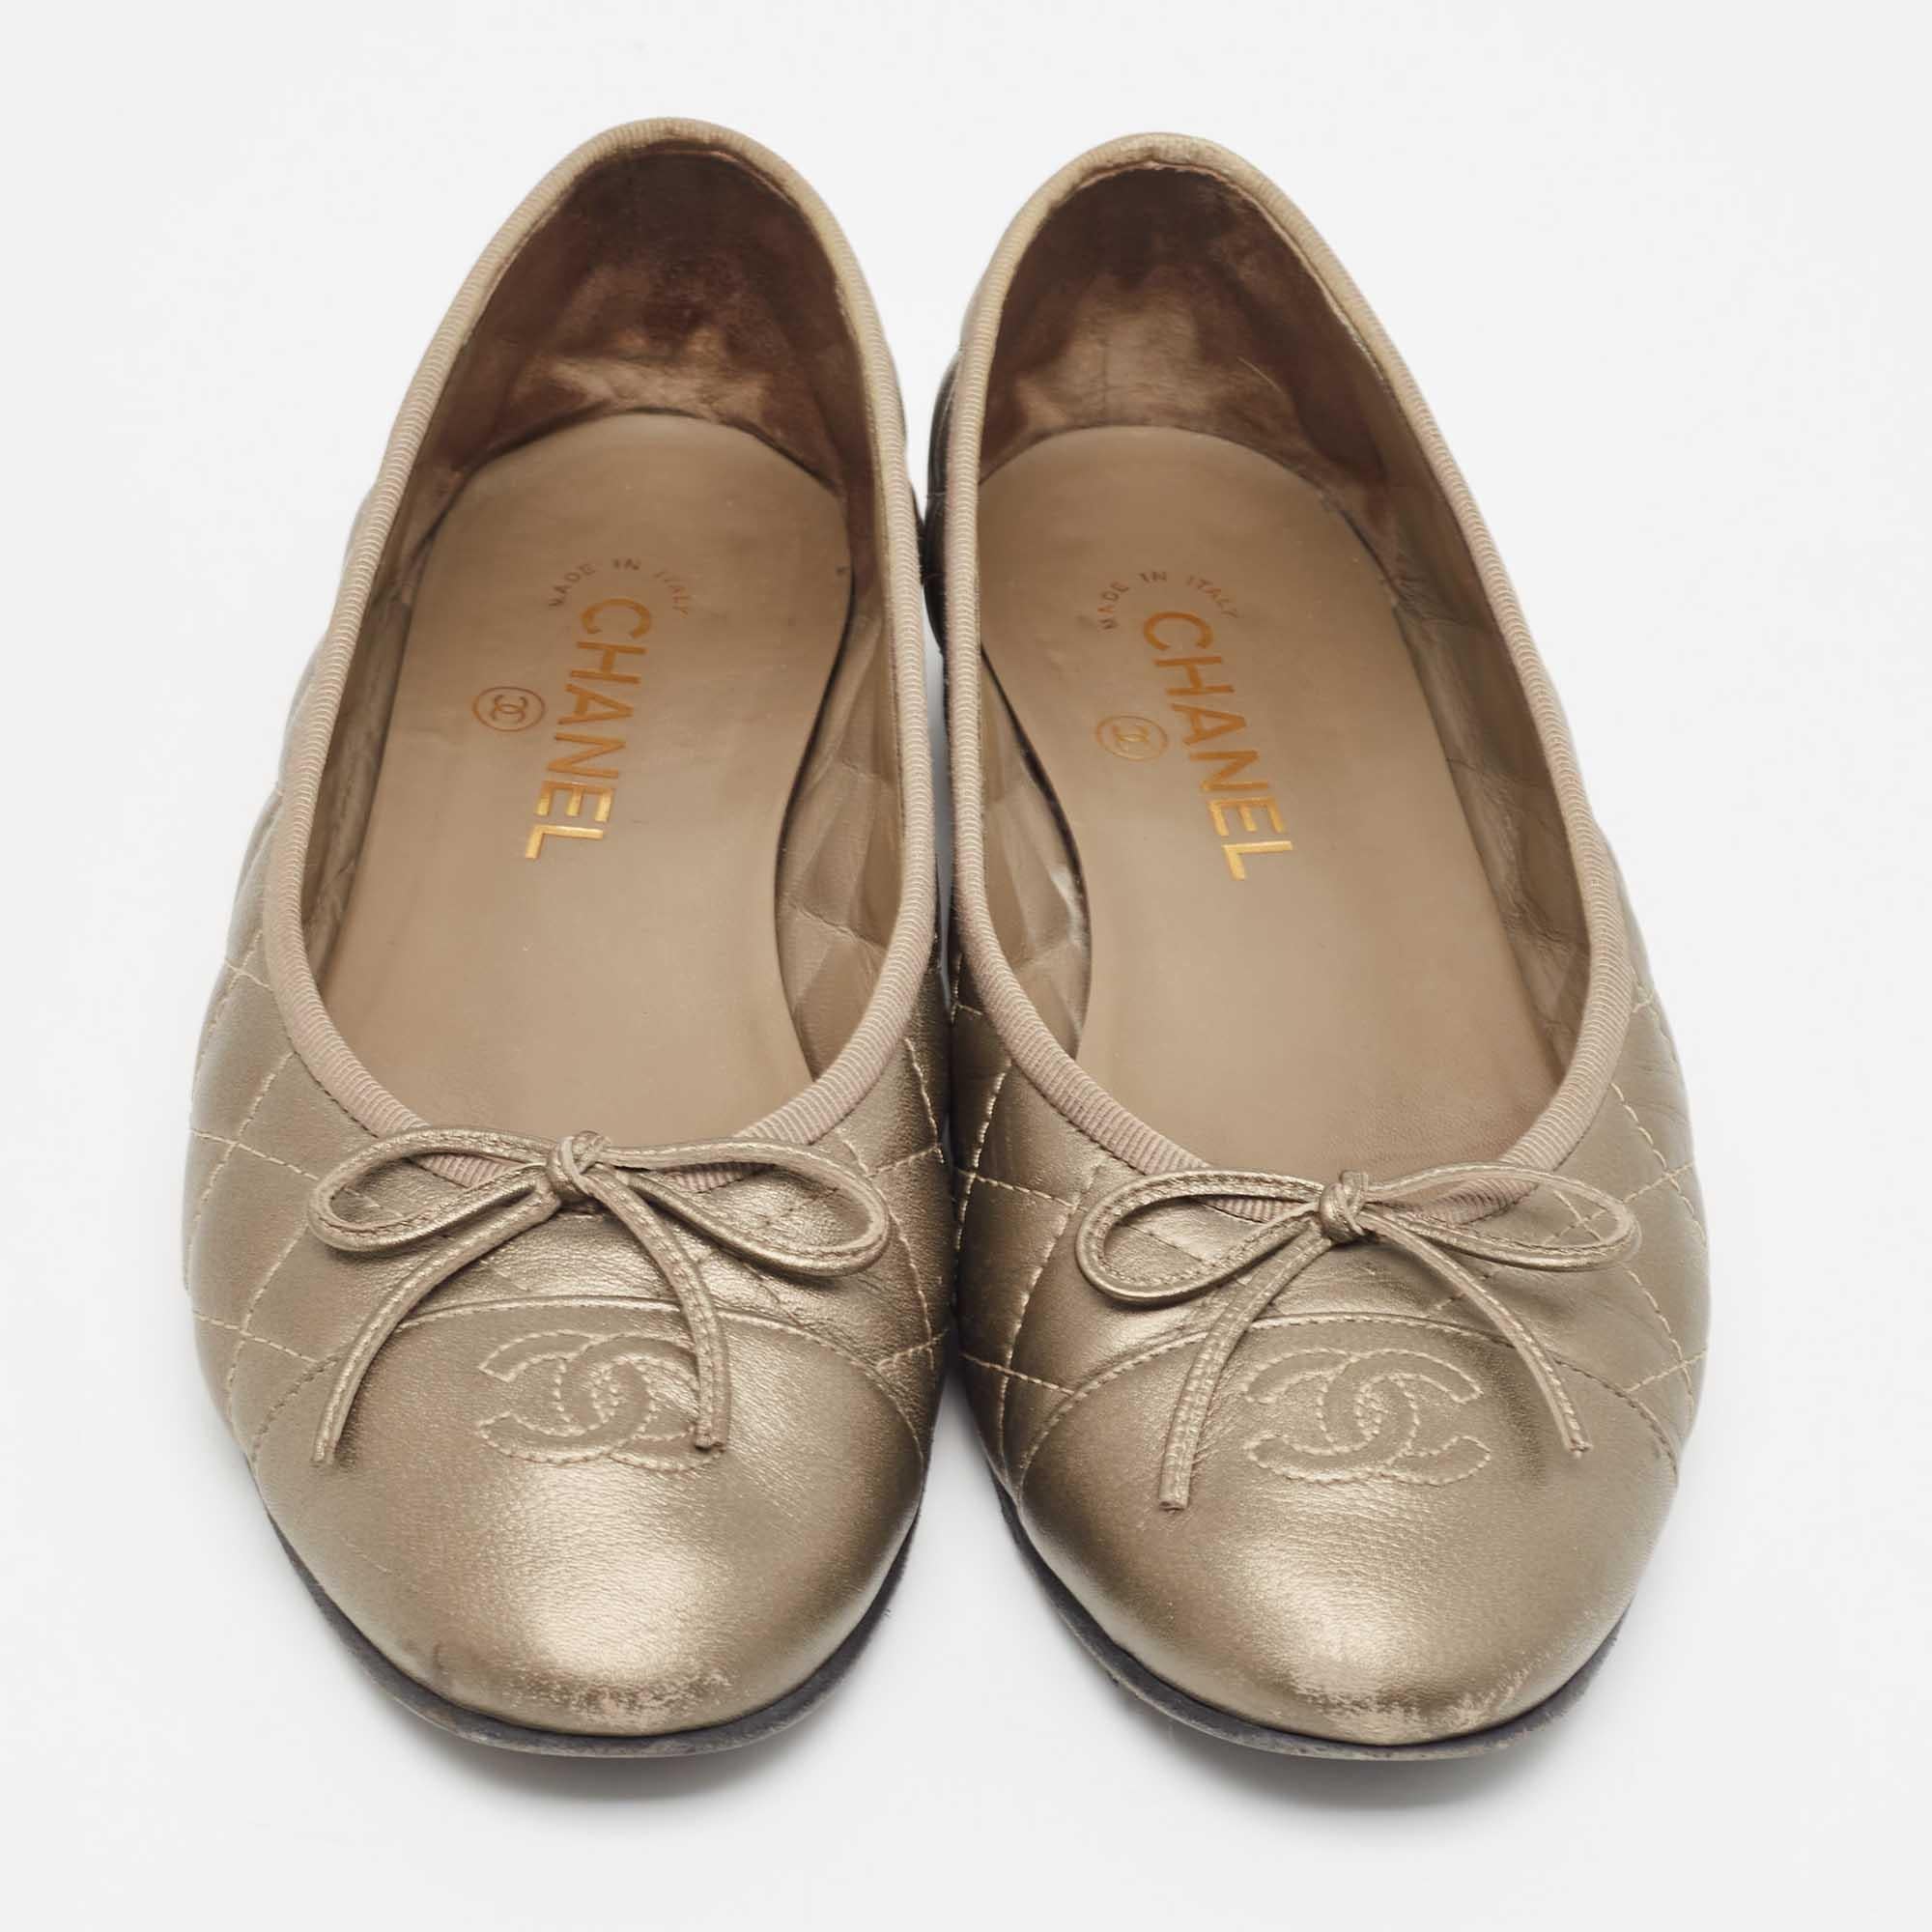 Defined by comfort and effortless style, no wardrobe is ever complete without a pair of chic ballet flats. This pair is lovely to look at and is equipped with elements like a comfortable insole and a durable sole.

Includes
Original Dustbag,